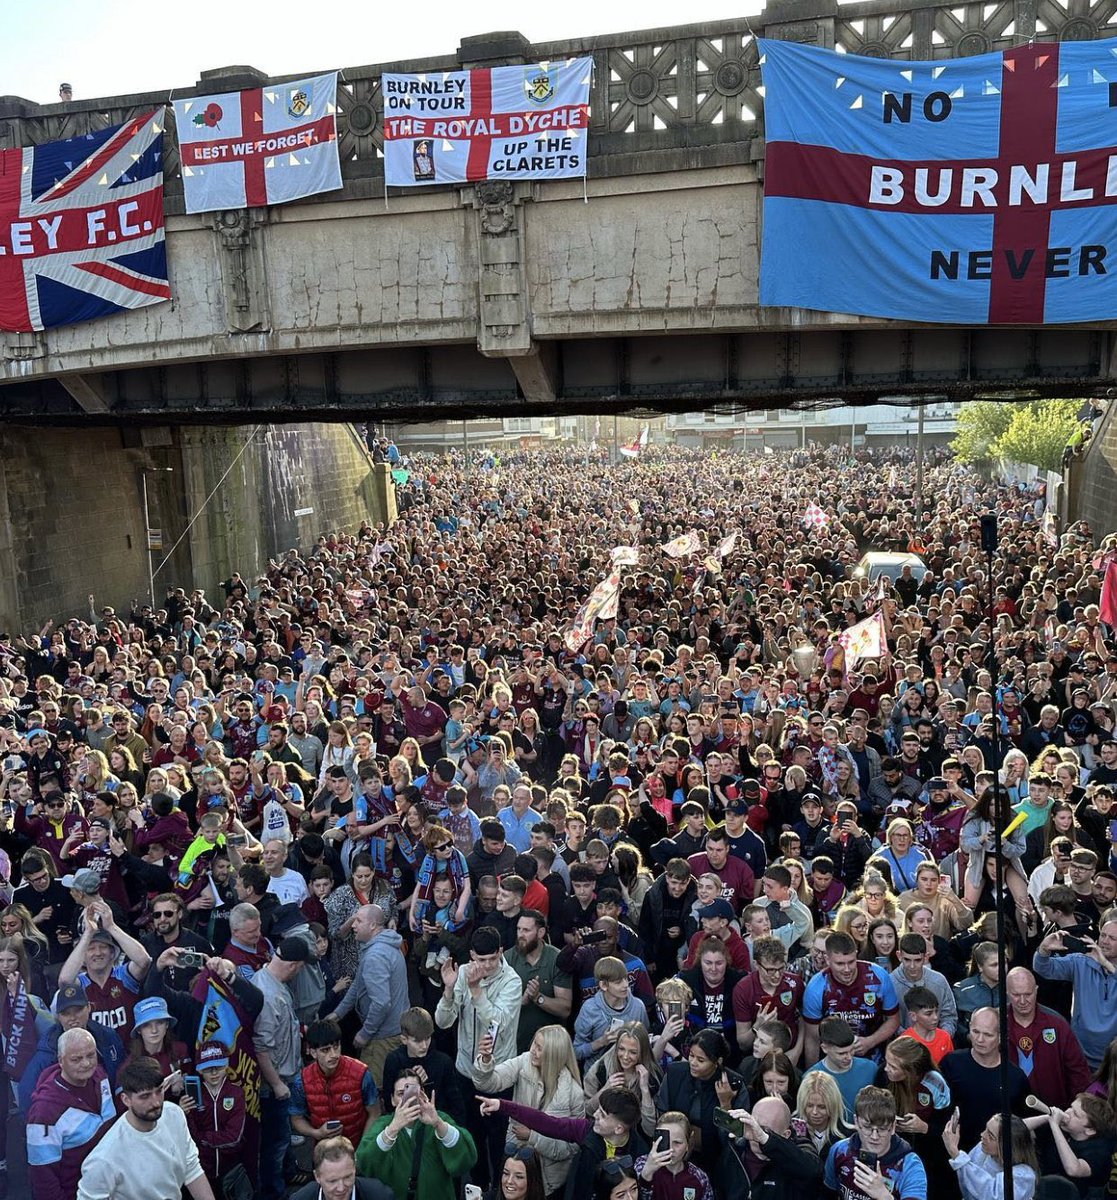 No need to hide disappointment or frustration, it should hurt. Boys made a valiant run of it the last few months, just wasn’t enough in the end. Now we go again in The Championship. Looking to relive these brilliant memories from one year ago. We go together. Up The Clarets!